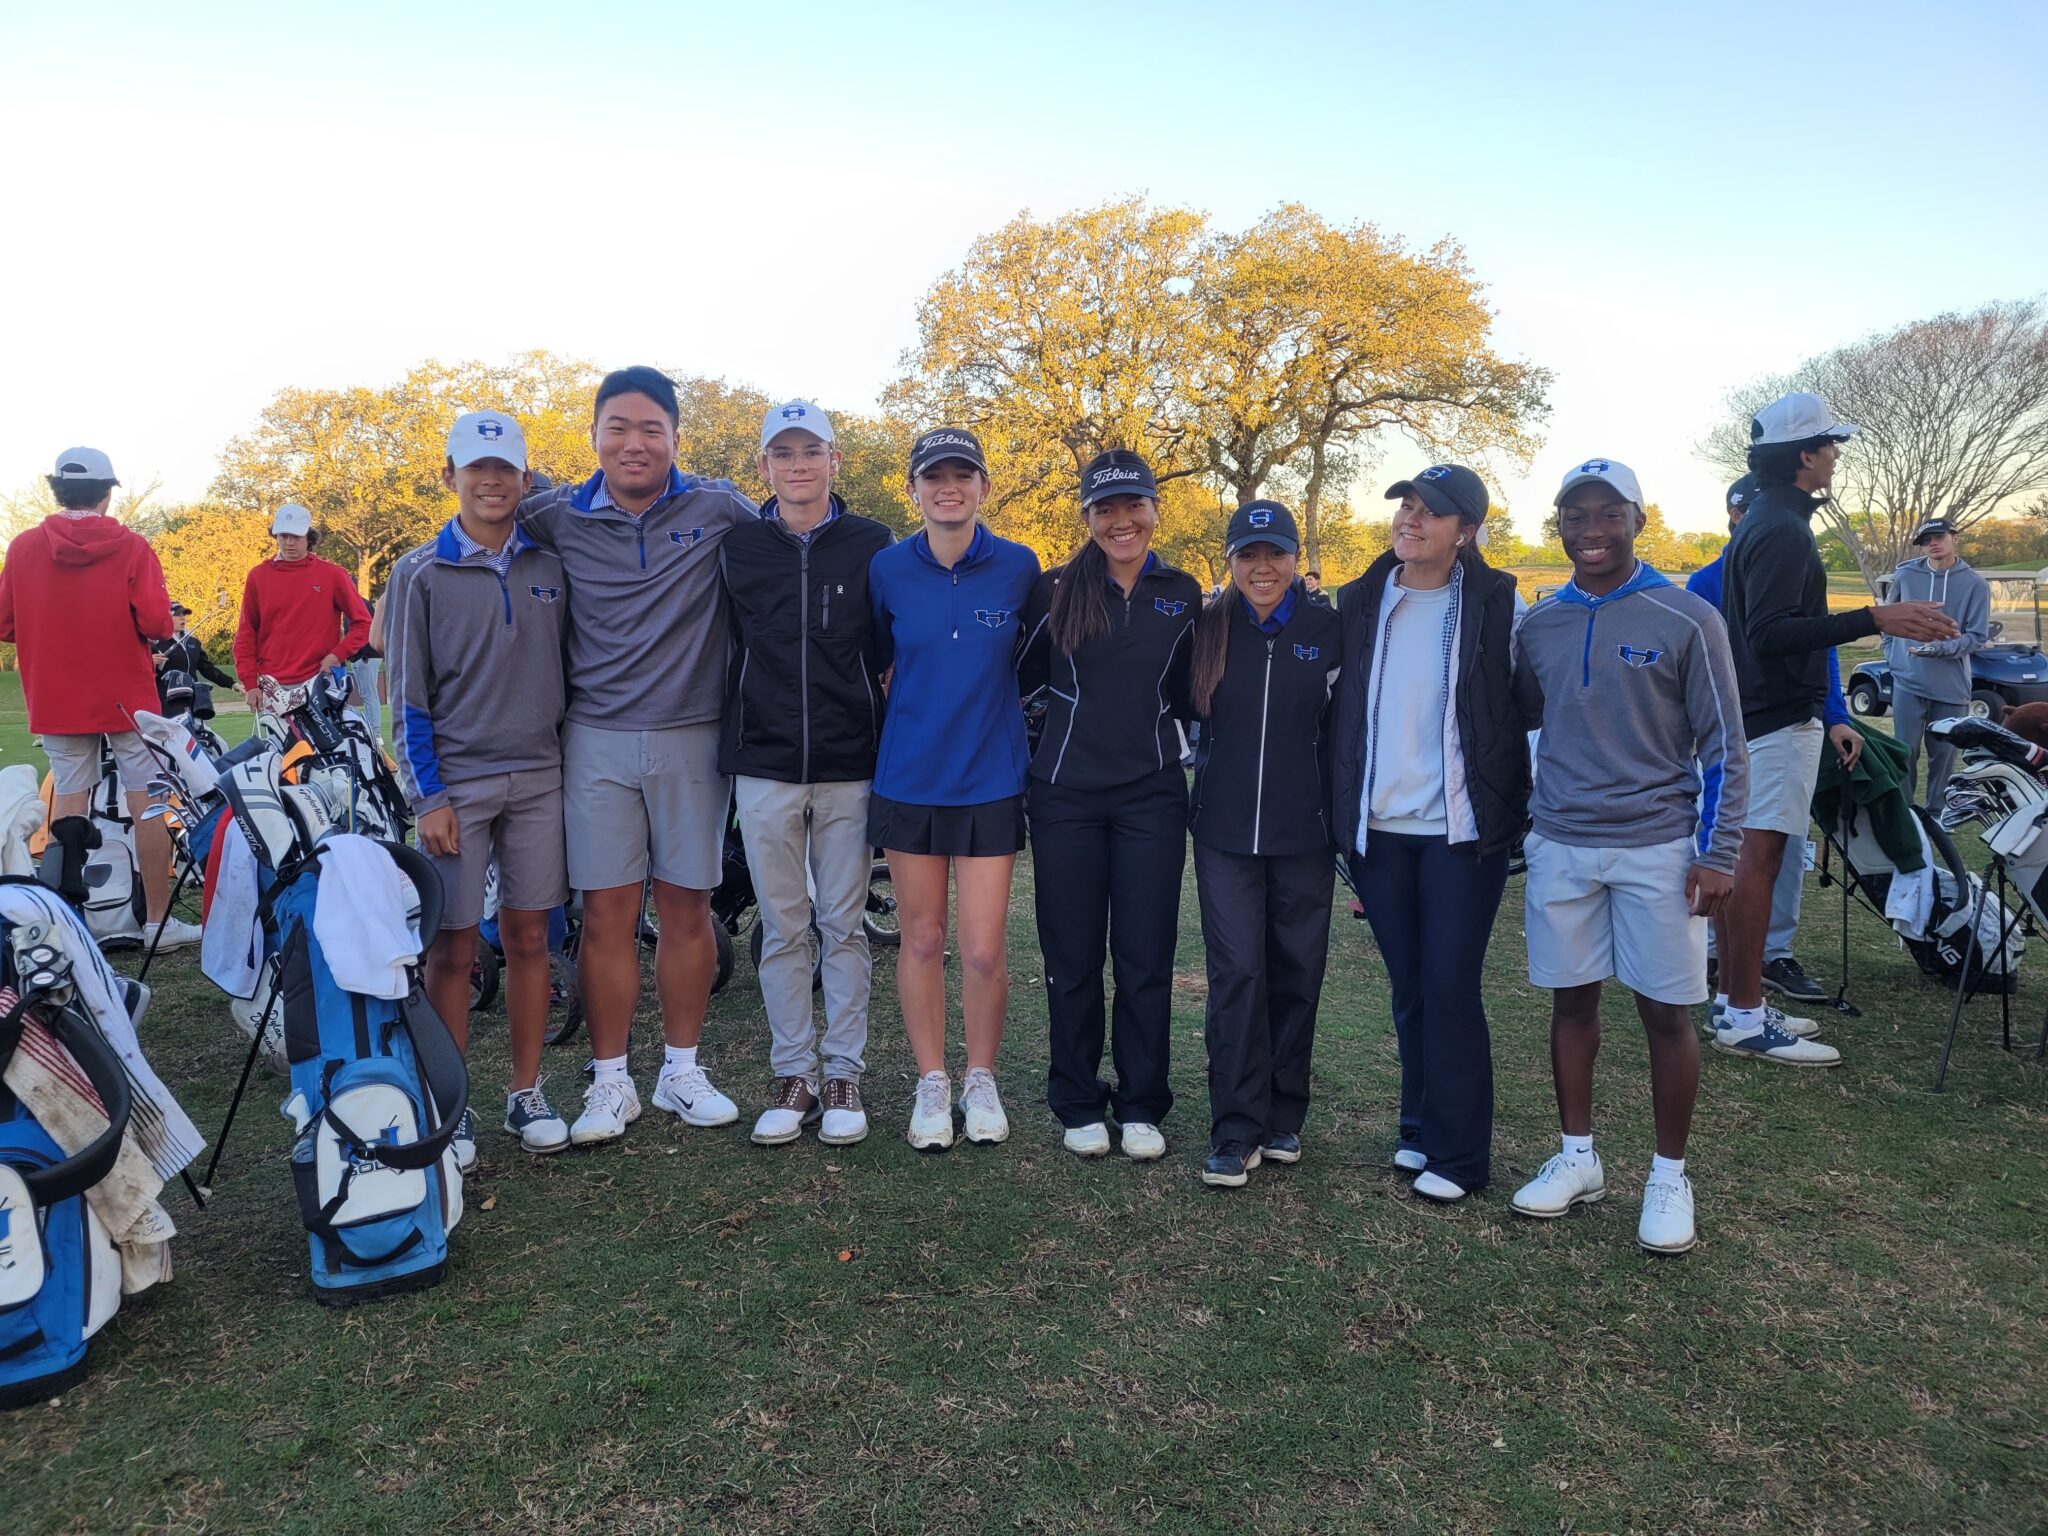 Group of girls and boys standing together with golf kit